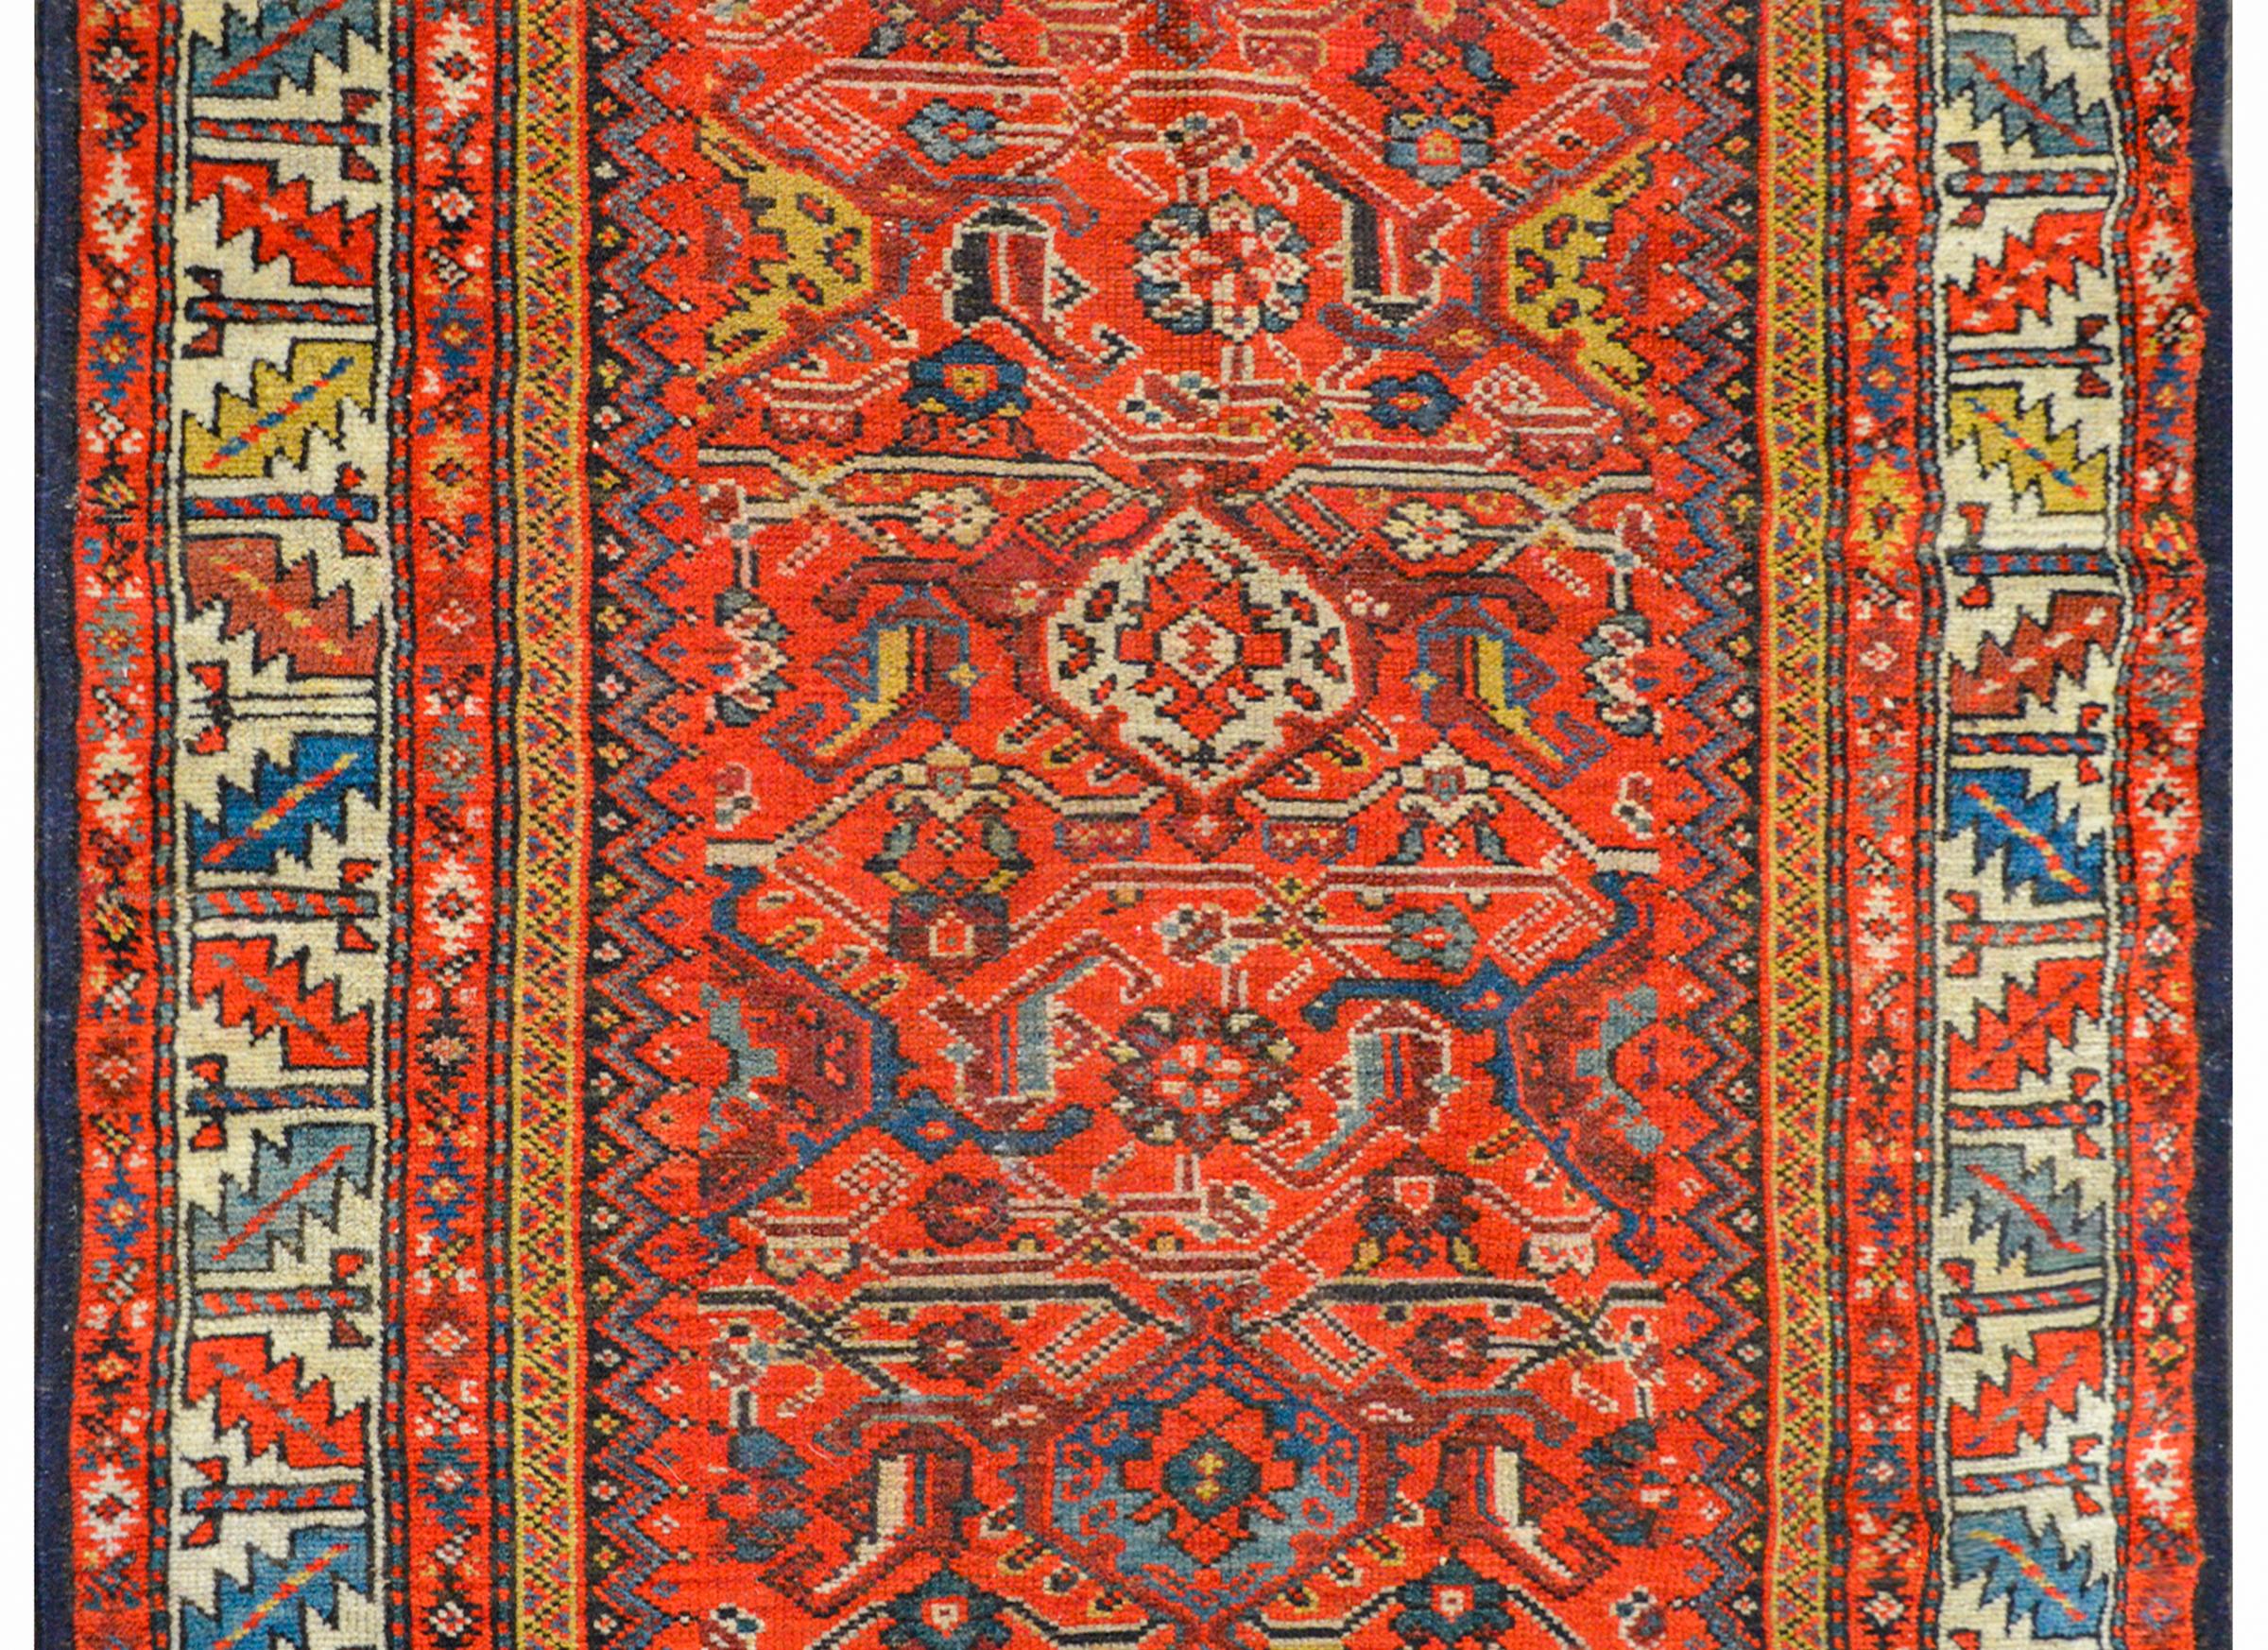 An outstanding early 20th century Azerbaijani Azari Herati runner with a large scale pattern of stylized flowers, vines, and leaves woven in light and dark indigo, crimson, white, and gold on a rich crimson background. The border is composed of